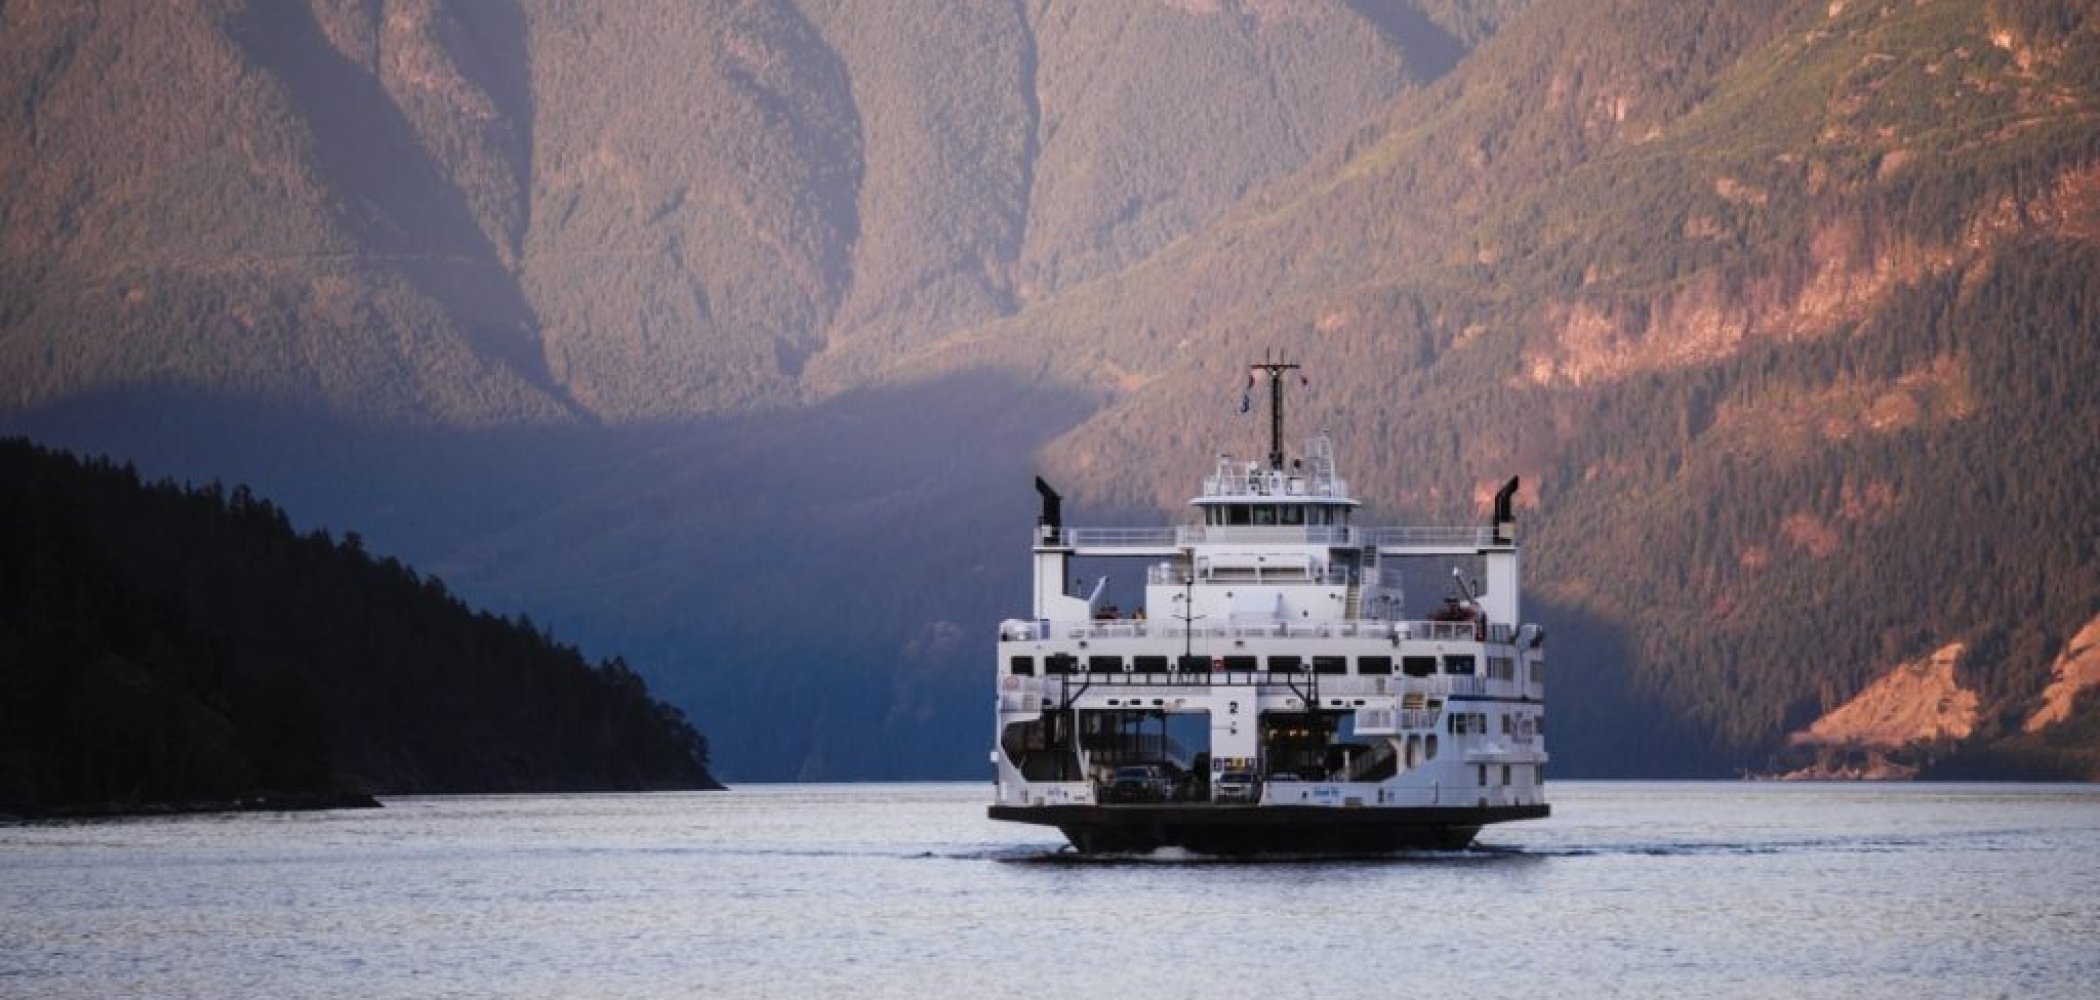 A ferry on the water in front of large mountains behind it